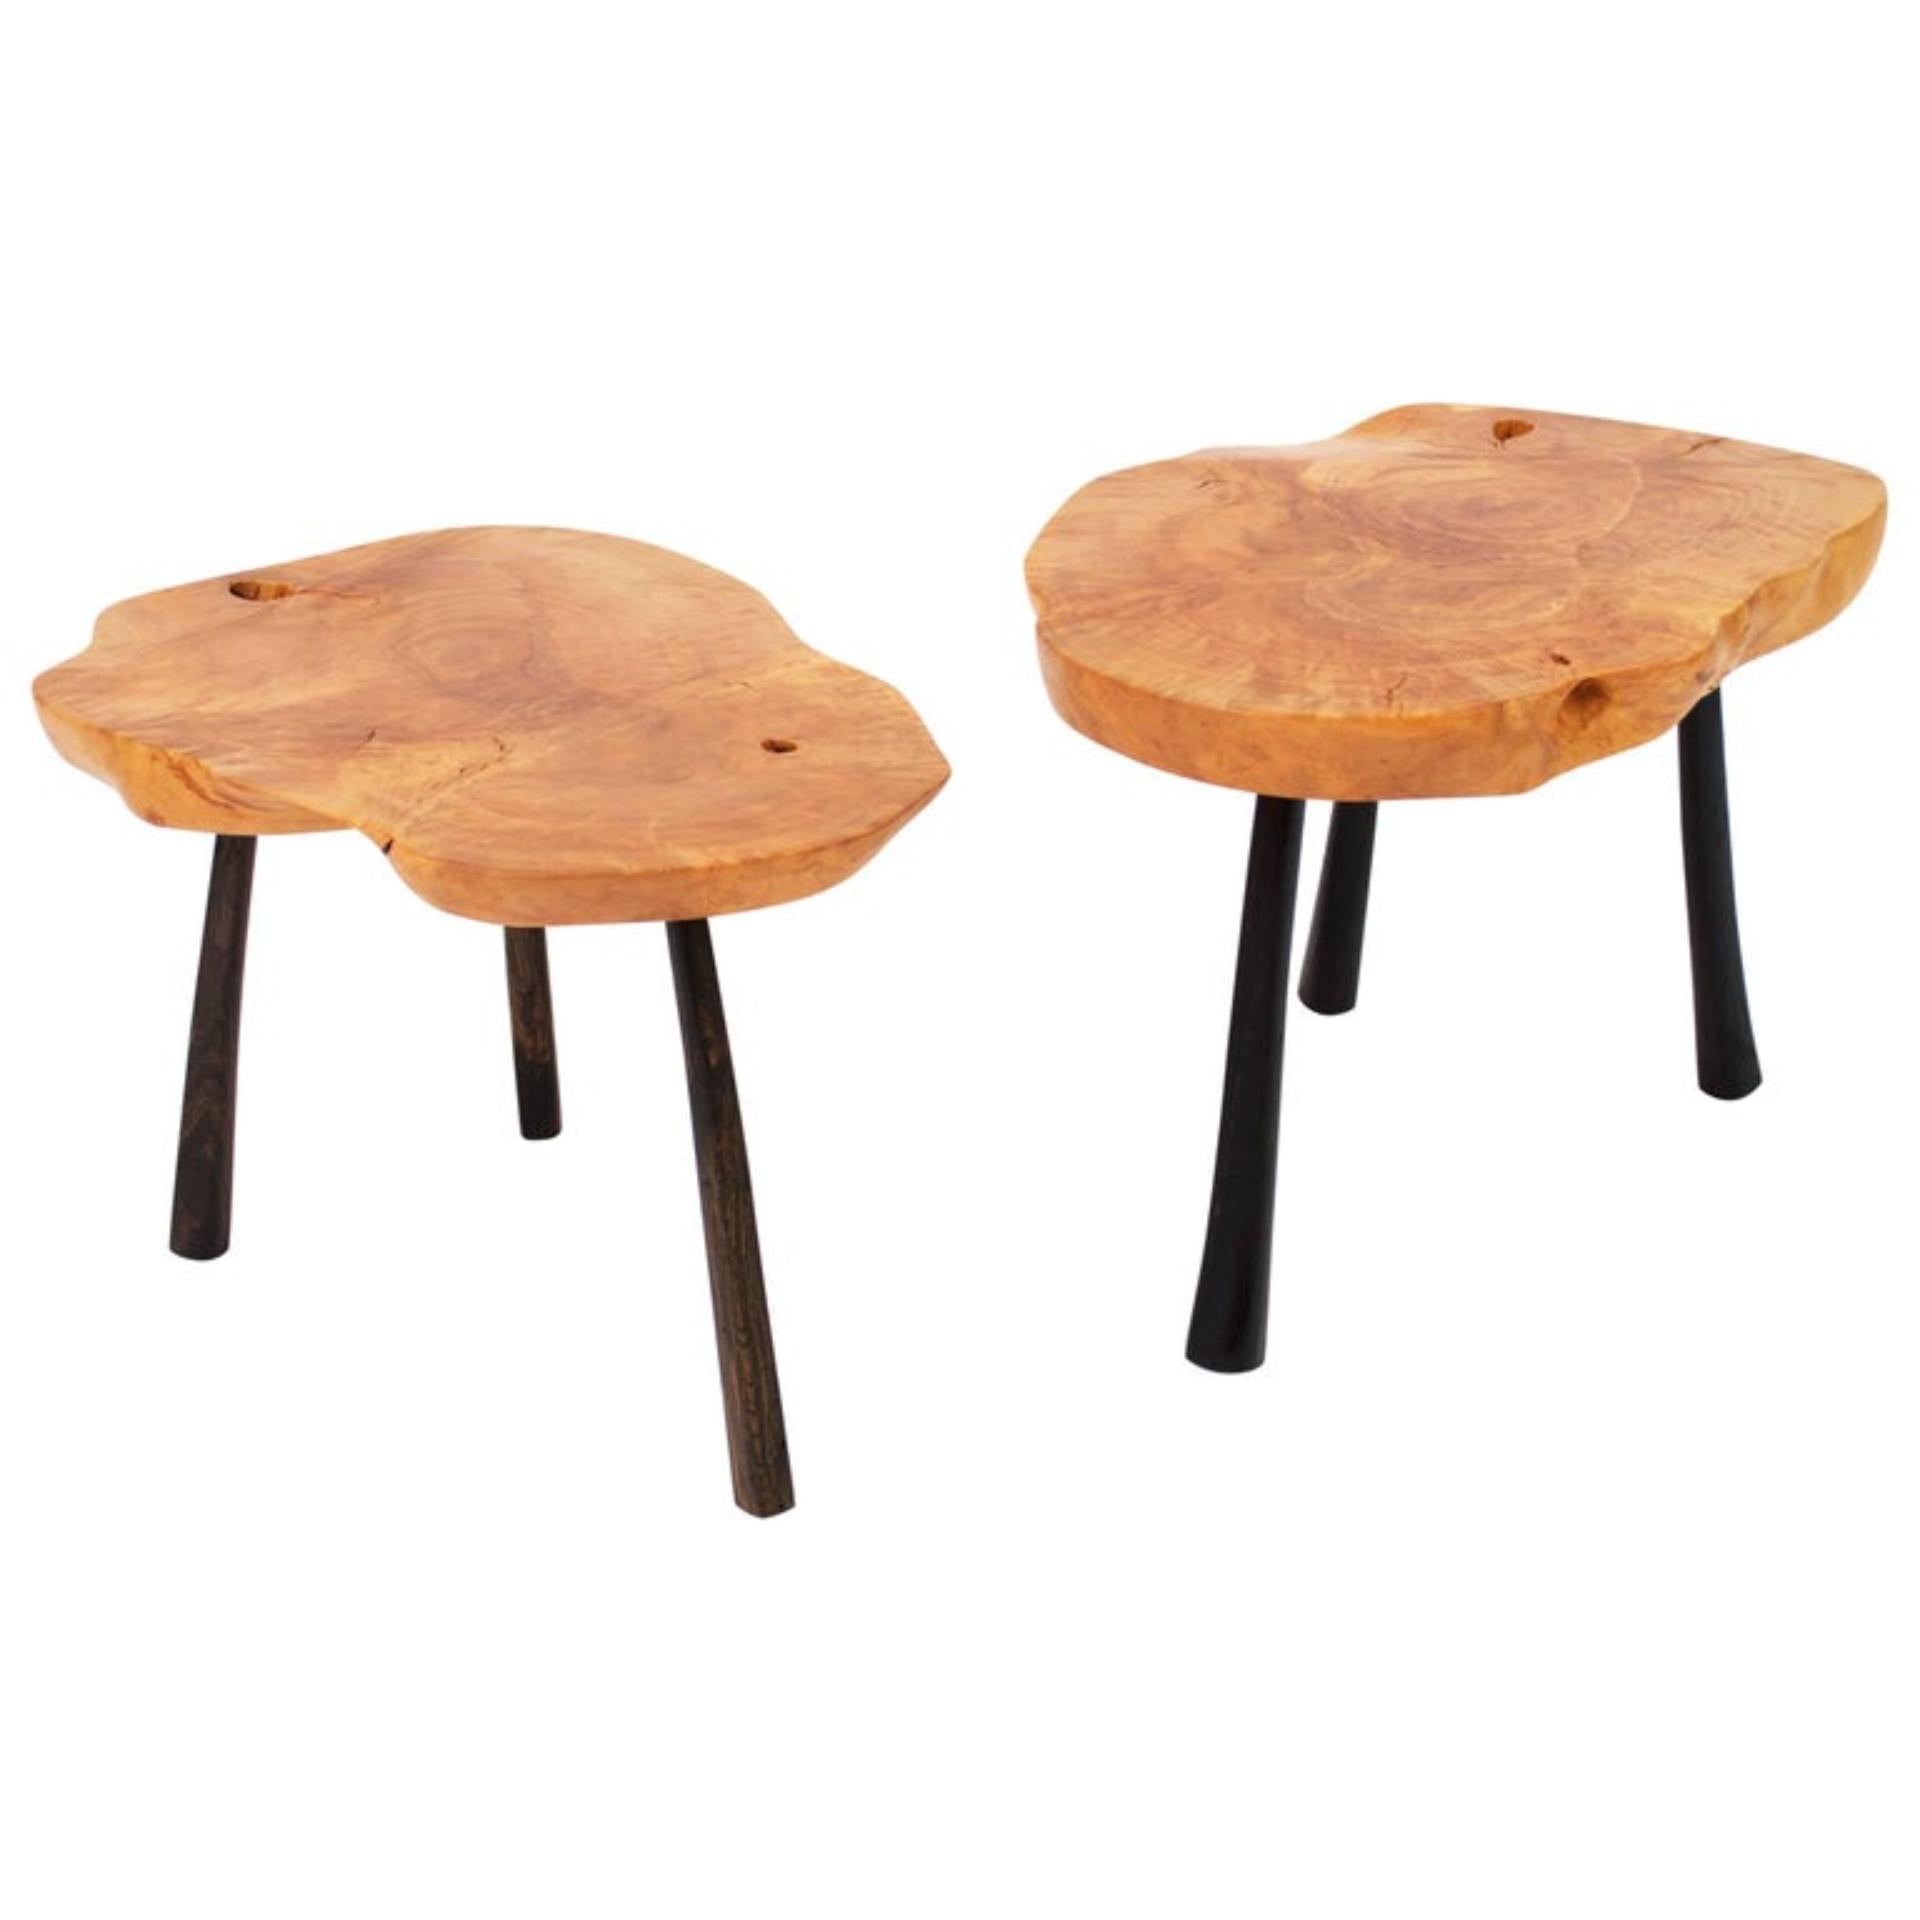 Unique signed pair of tables by Jörg Pietschmann
Twin tables olive, Bog oak. T1315
Measures: H 37 x W 52 x D 39 cm
H 39 x W 55 x D 41 cm
Pale olive on legs made of bog oak.
Polished oil finish.


In Pietschmann’s sculptures, trees that for